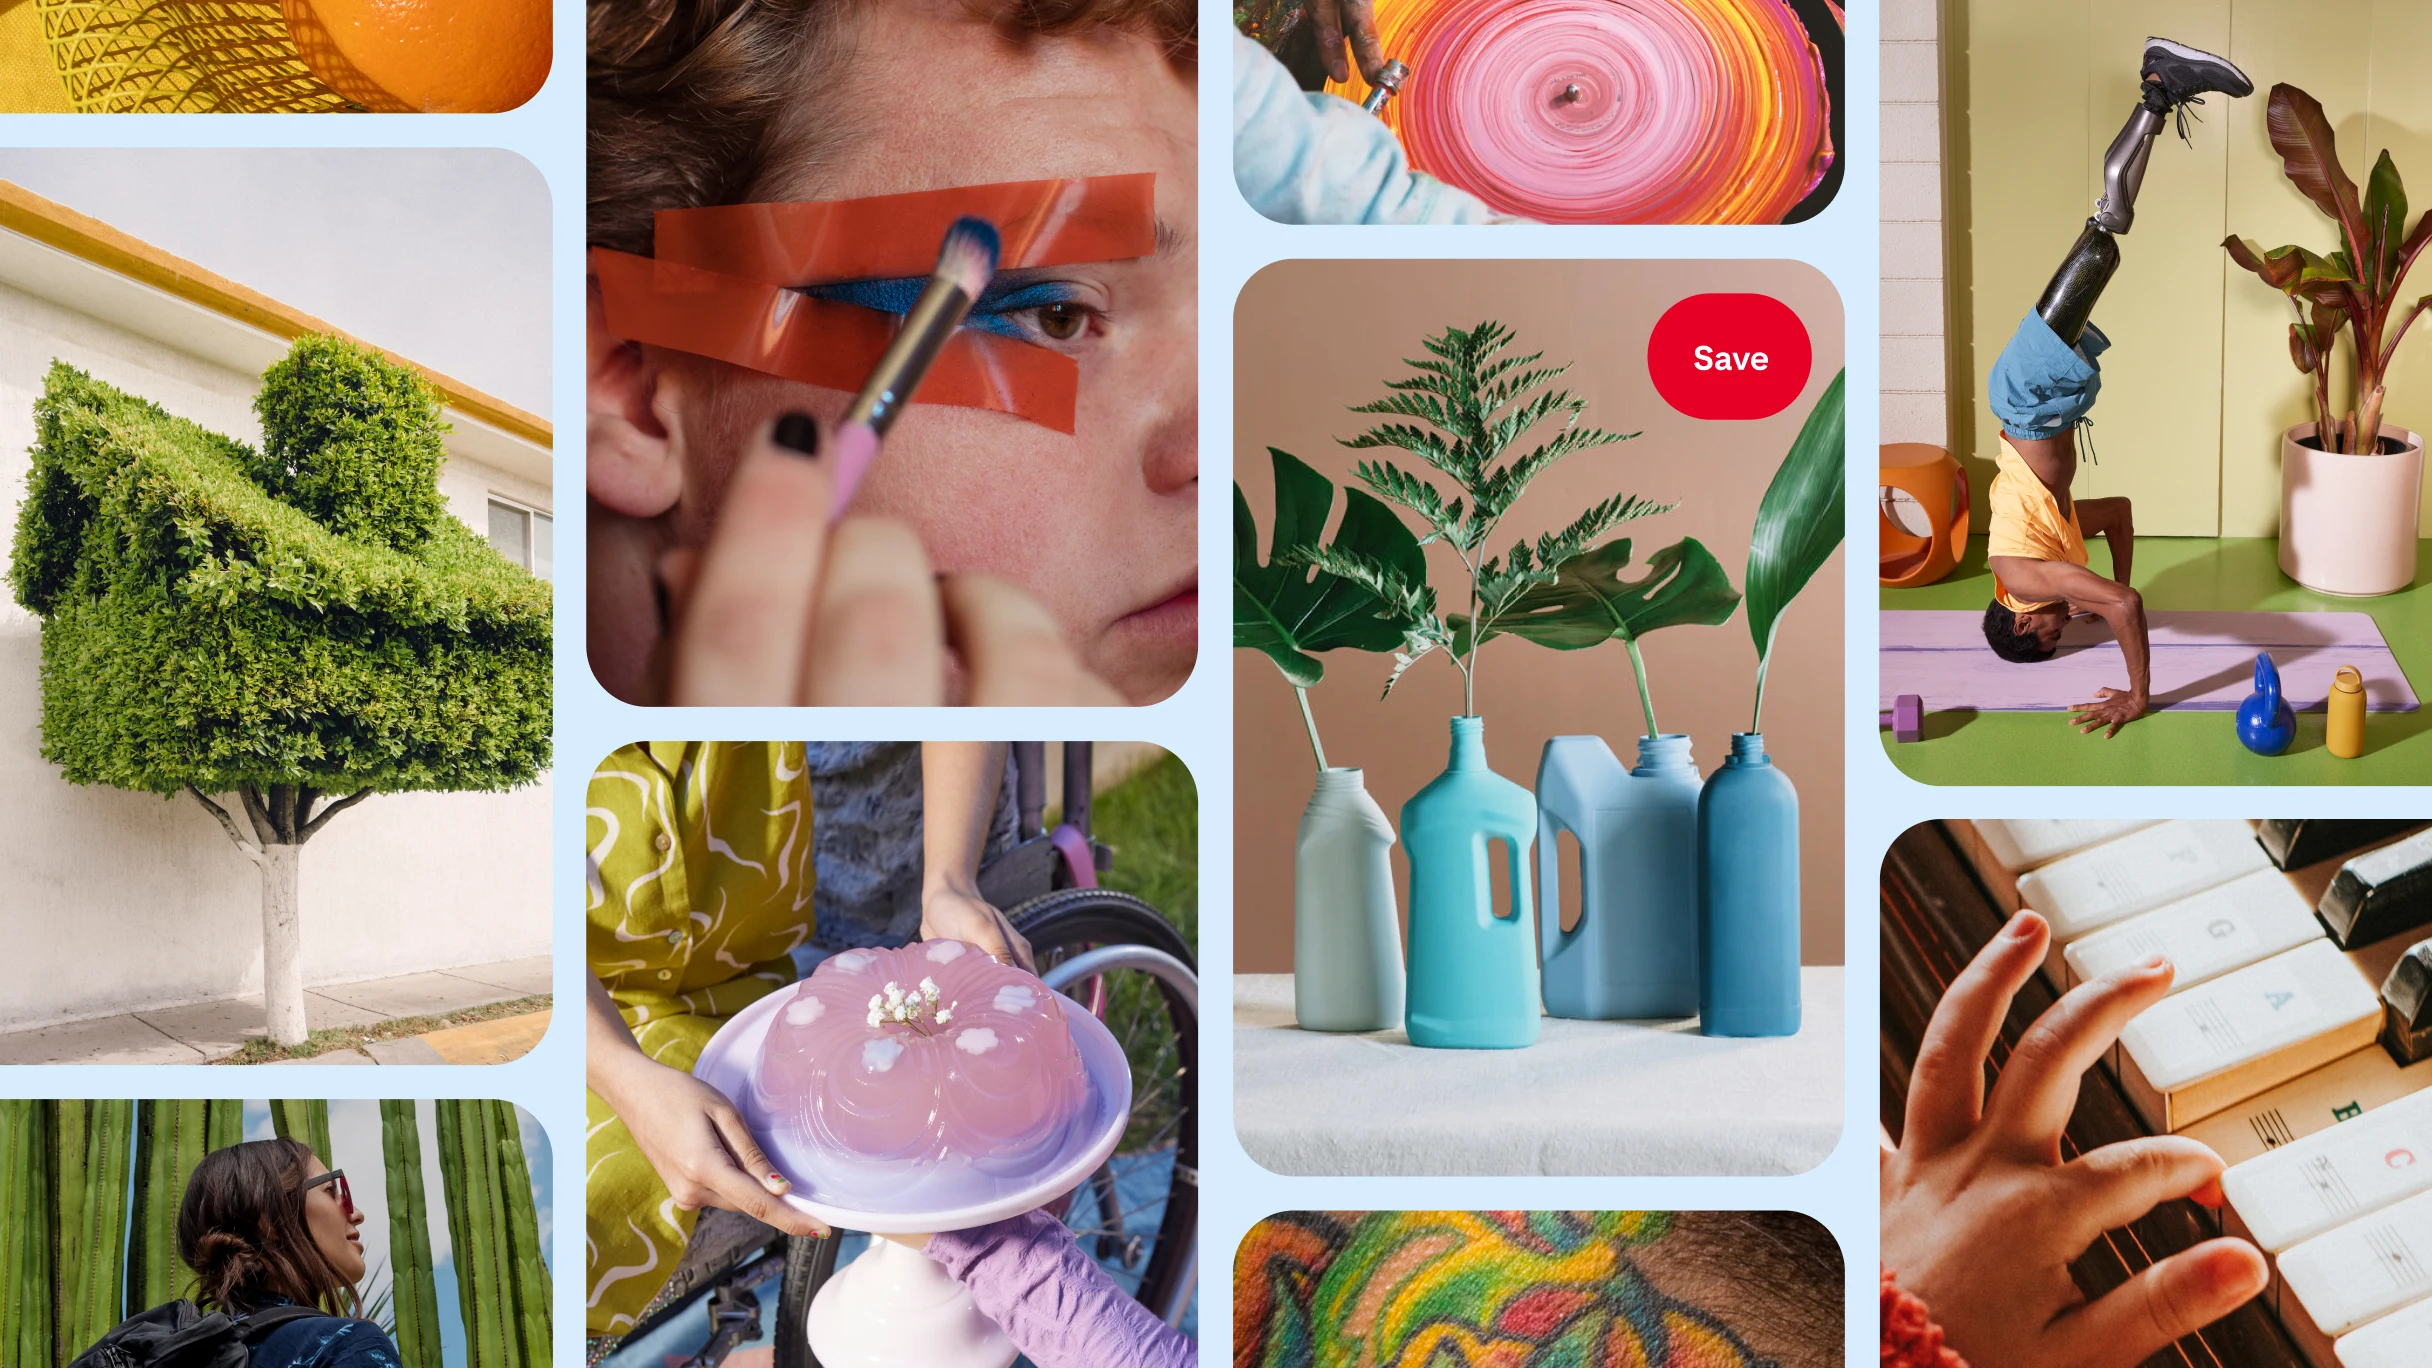  A Pinterest home feed featuring a person applying make up, green plants in vases, a person with prosthetic legs doing a head stand and more.